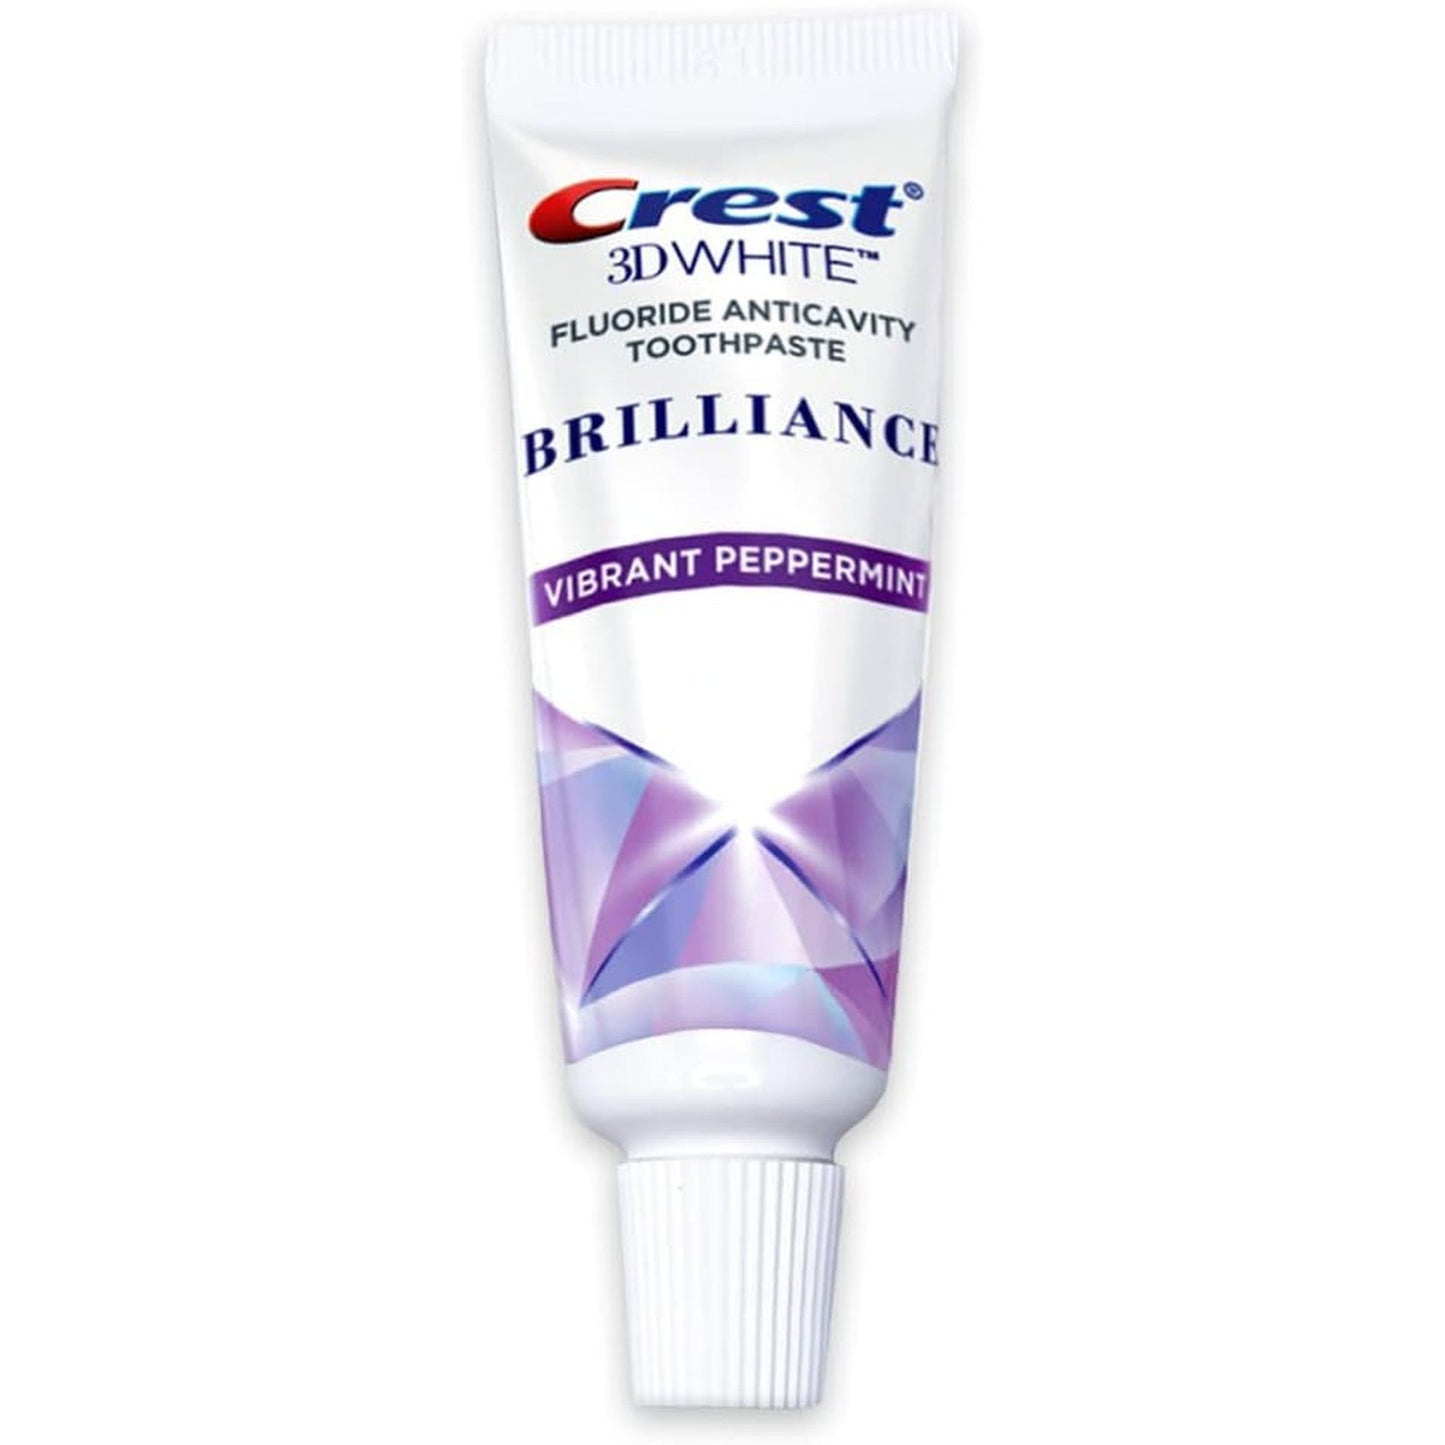 Crest 3D White Brilliance Toothpaste, Vibrant Peppermint, Travel Size 0.85 Oz (24G) - Pack of 8